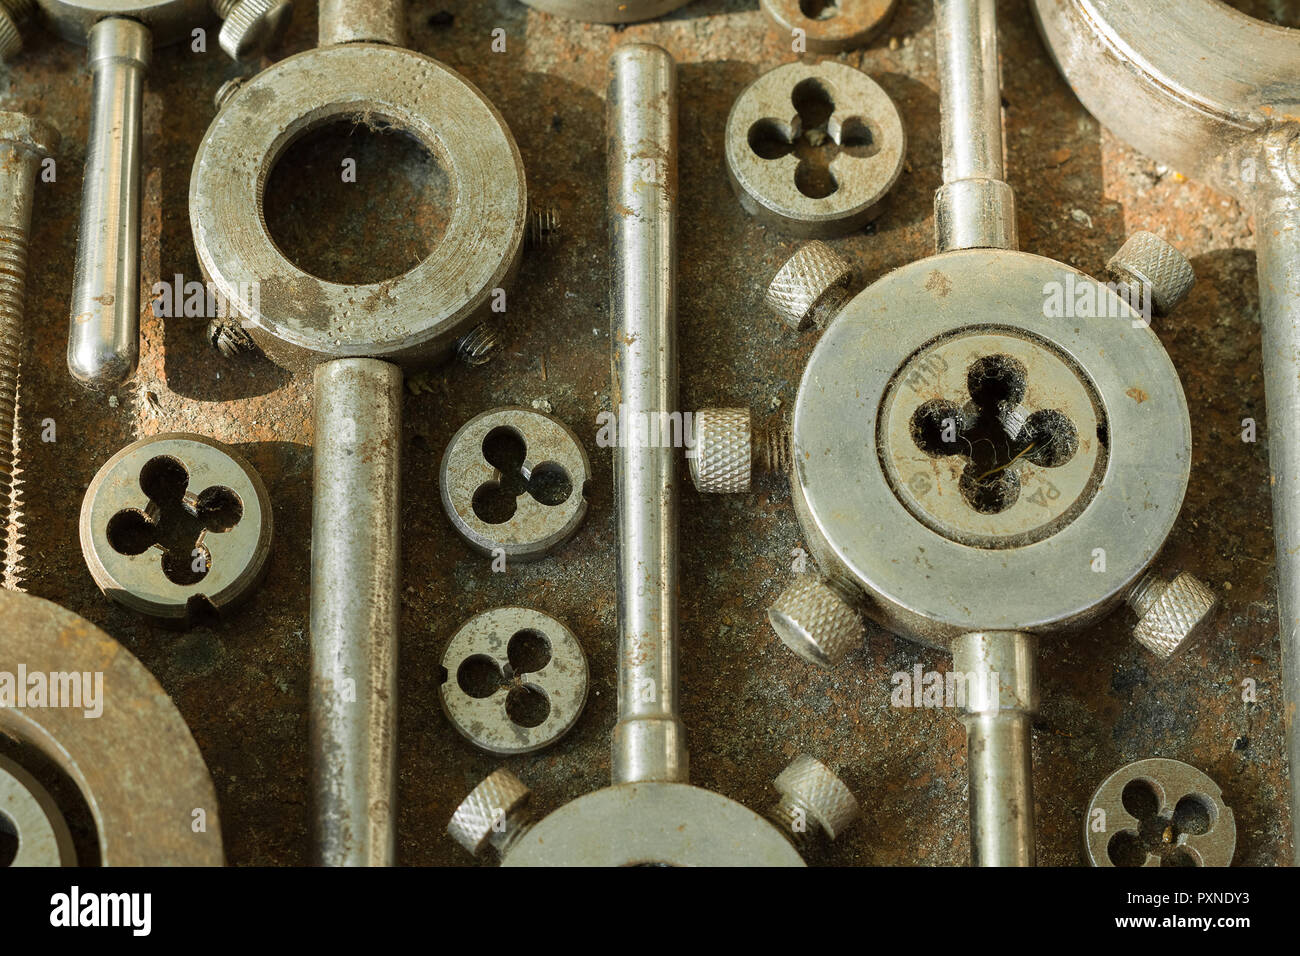 Threading dies on rusty metal surface close-up Stock Photo